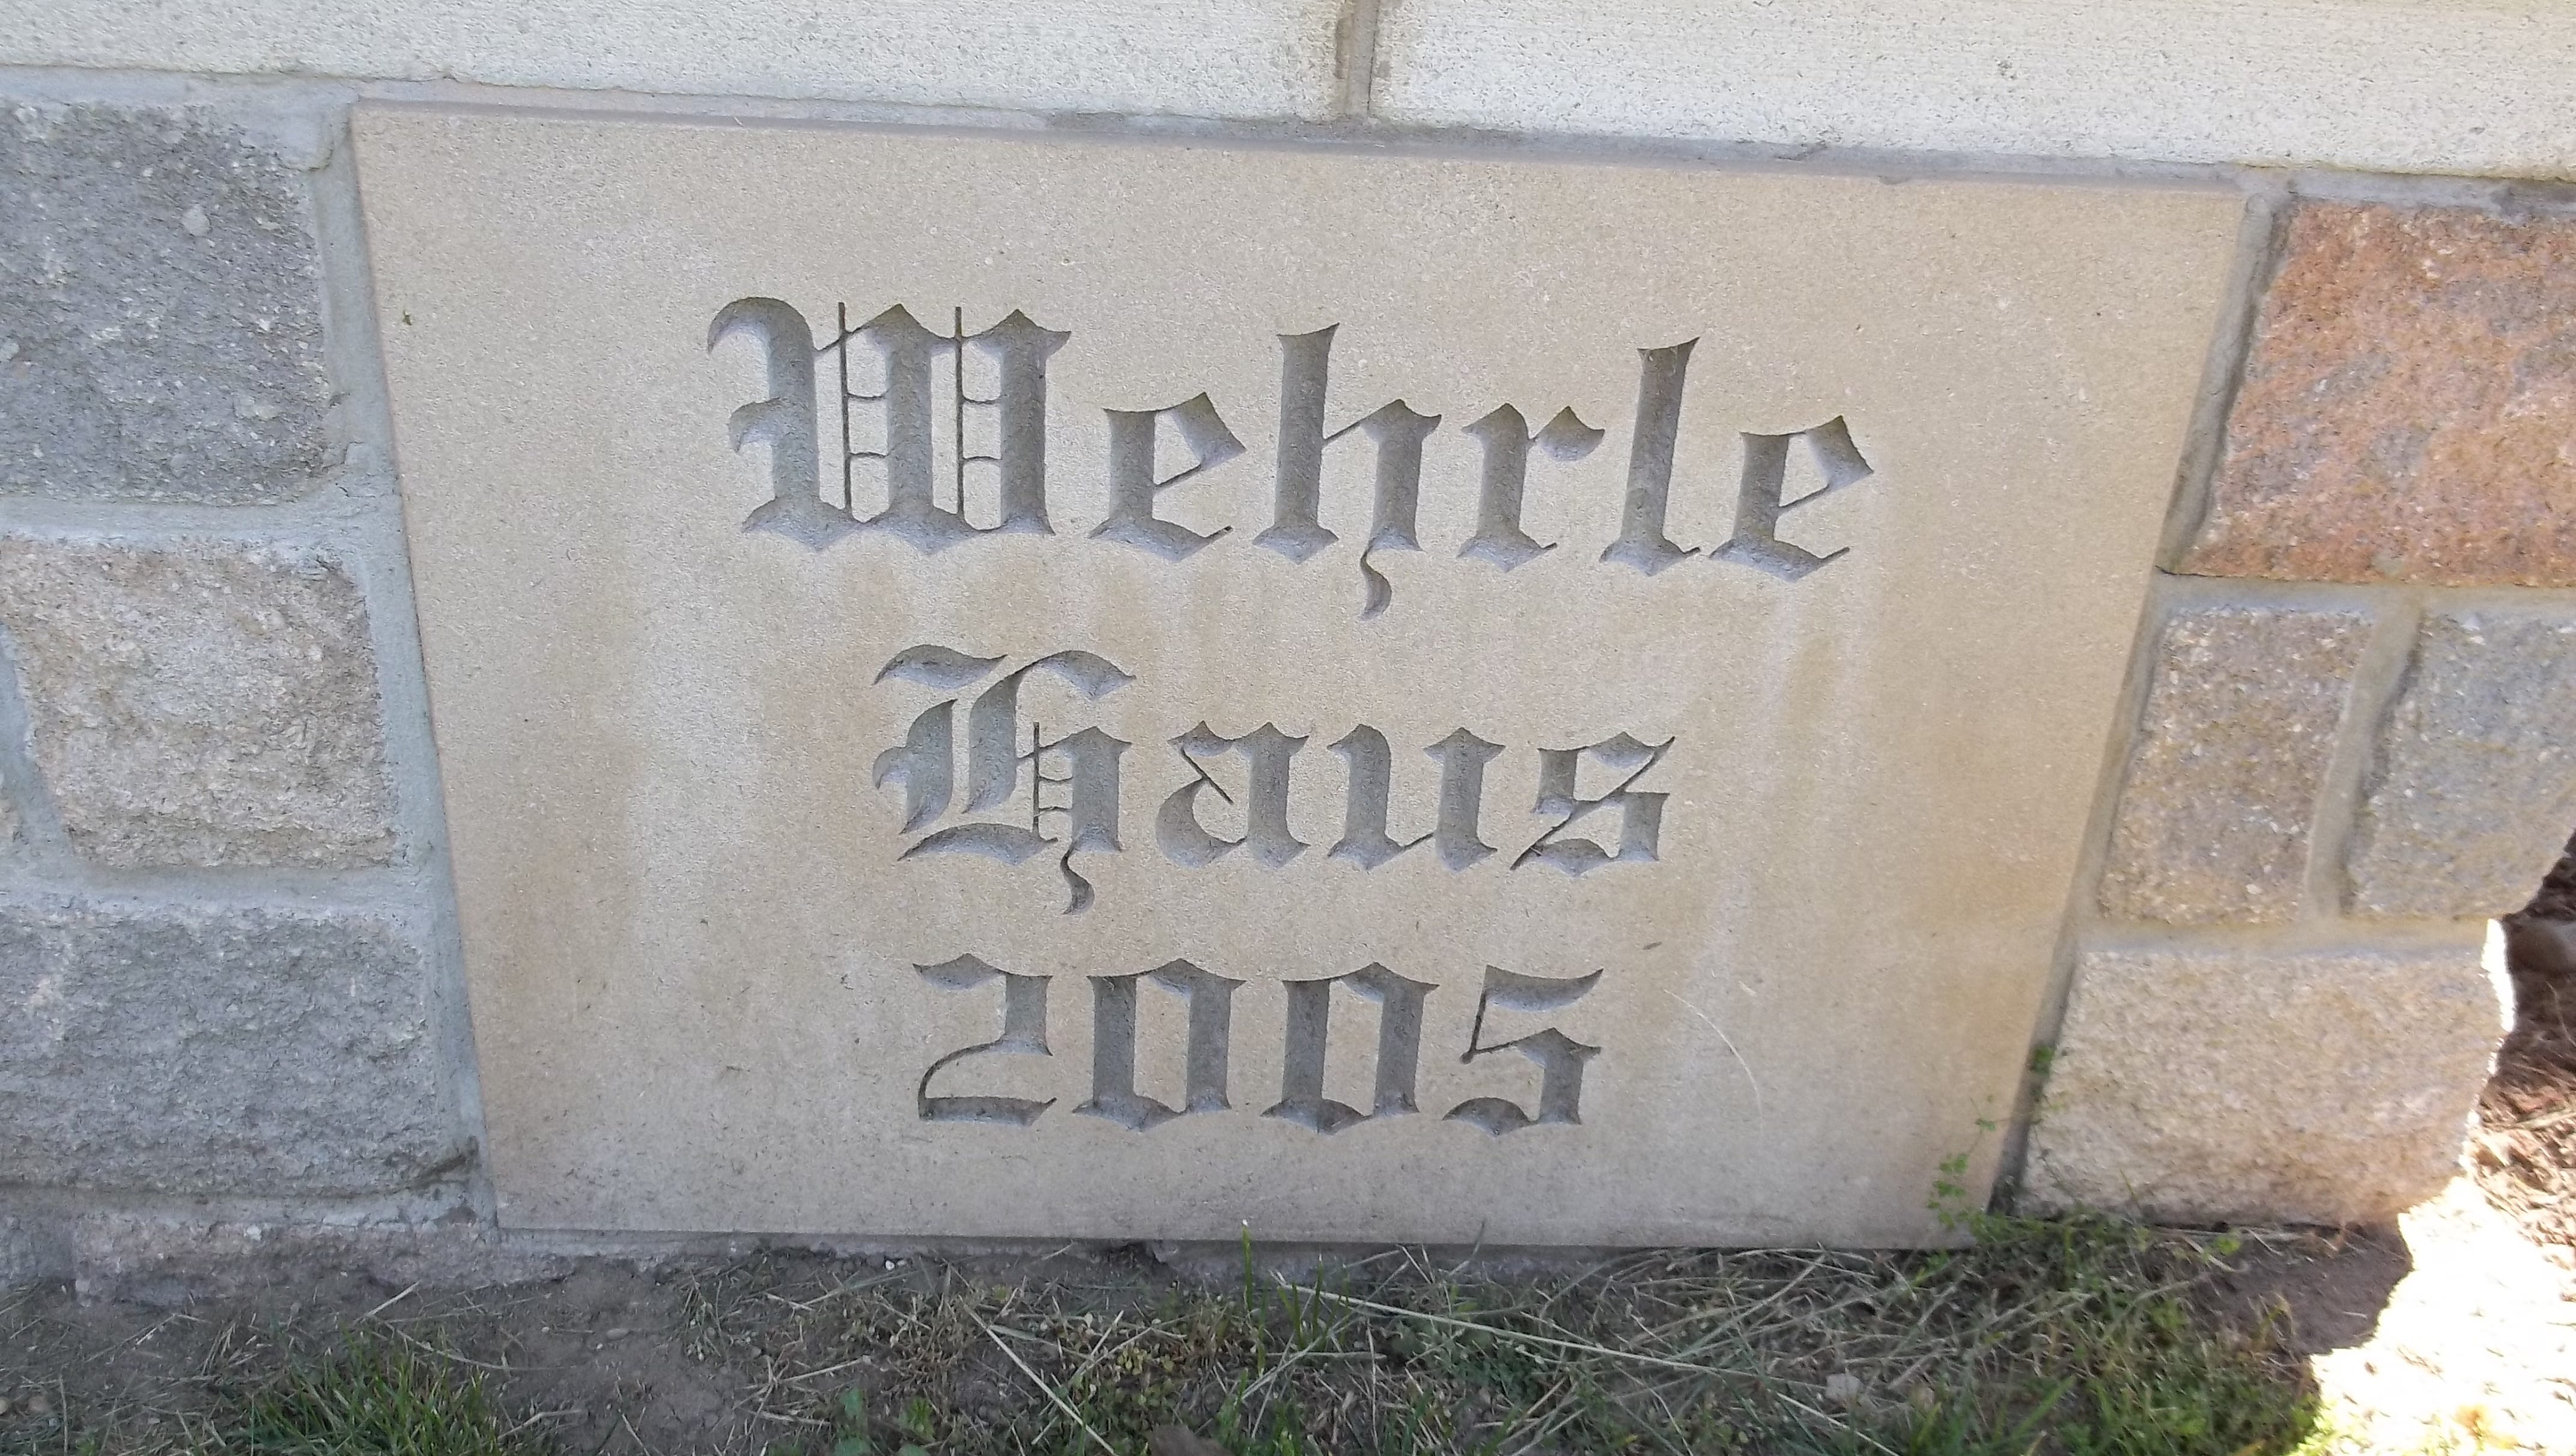 The Wehrle house has a cornerstone marking its construction.